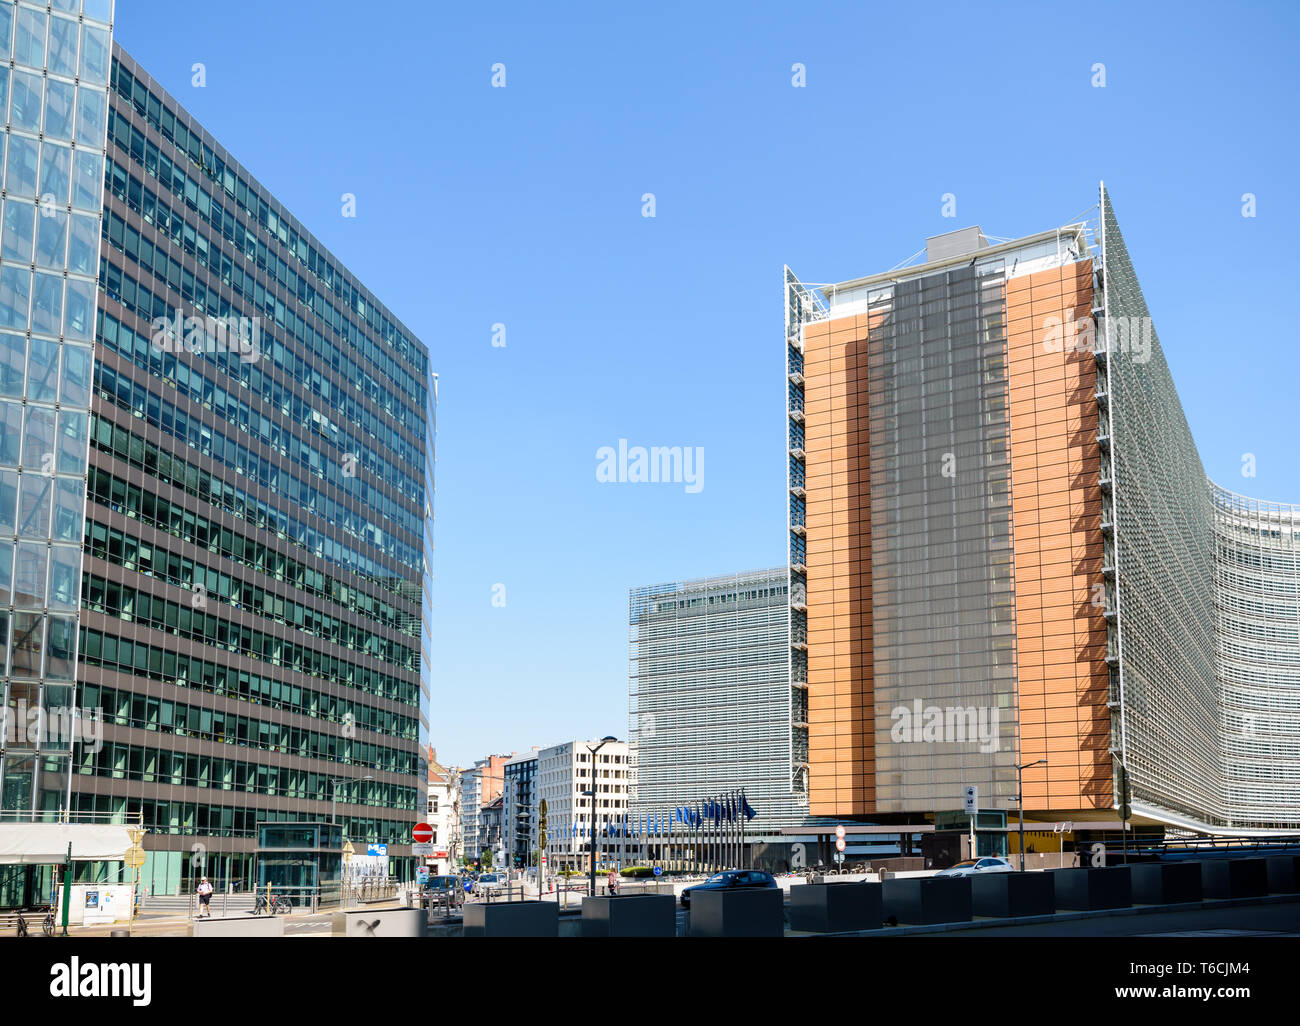 The western wing of the Berlaymont building, seat of the European Commission in the European Quarter in Brussels, Belgium. Stock Photo